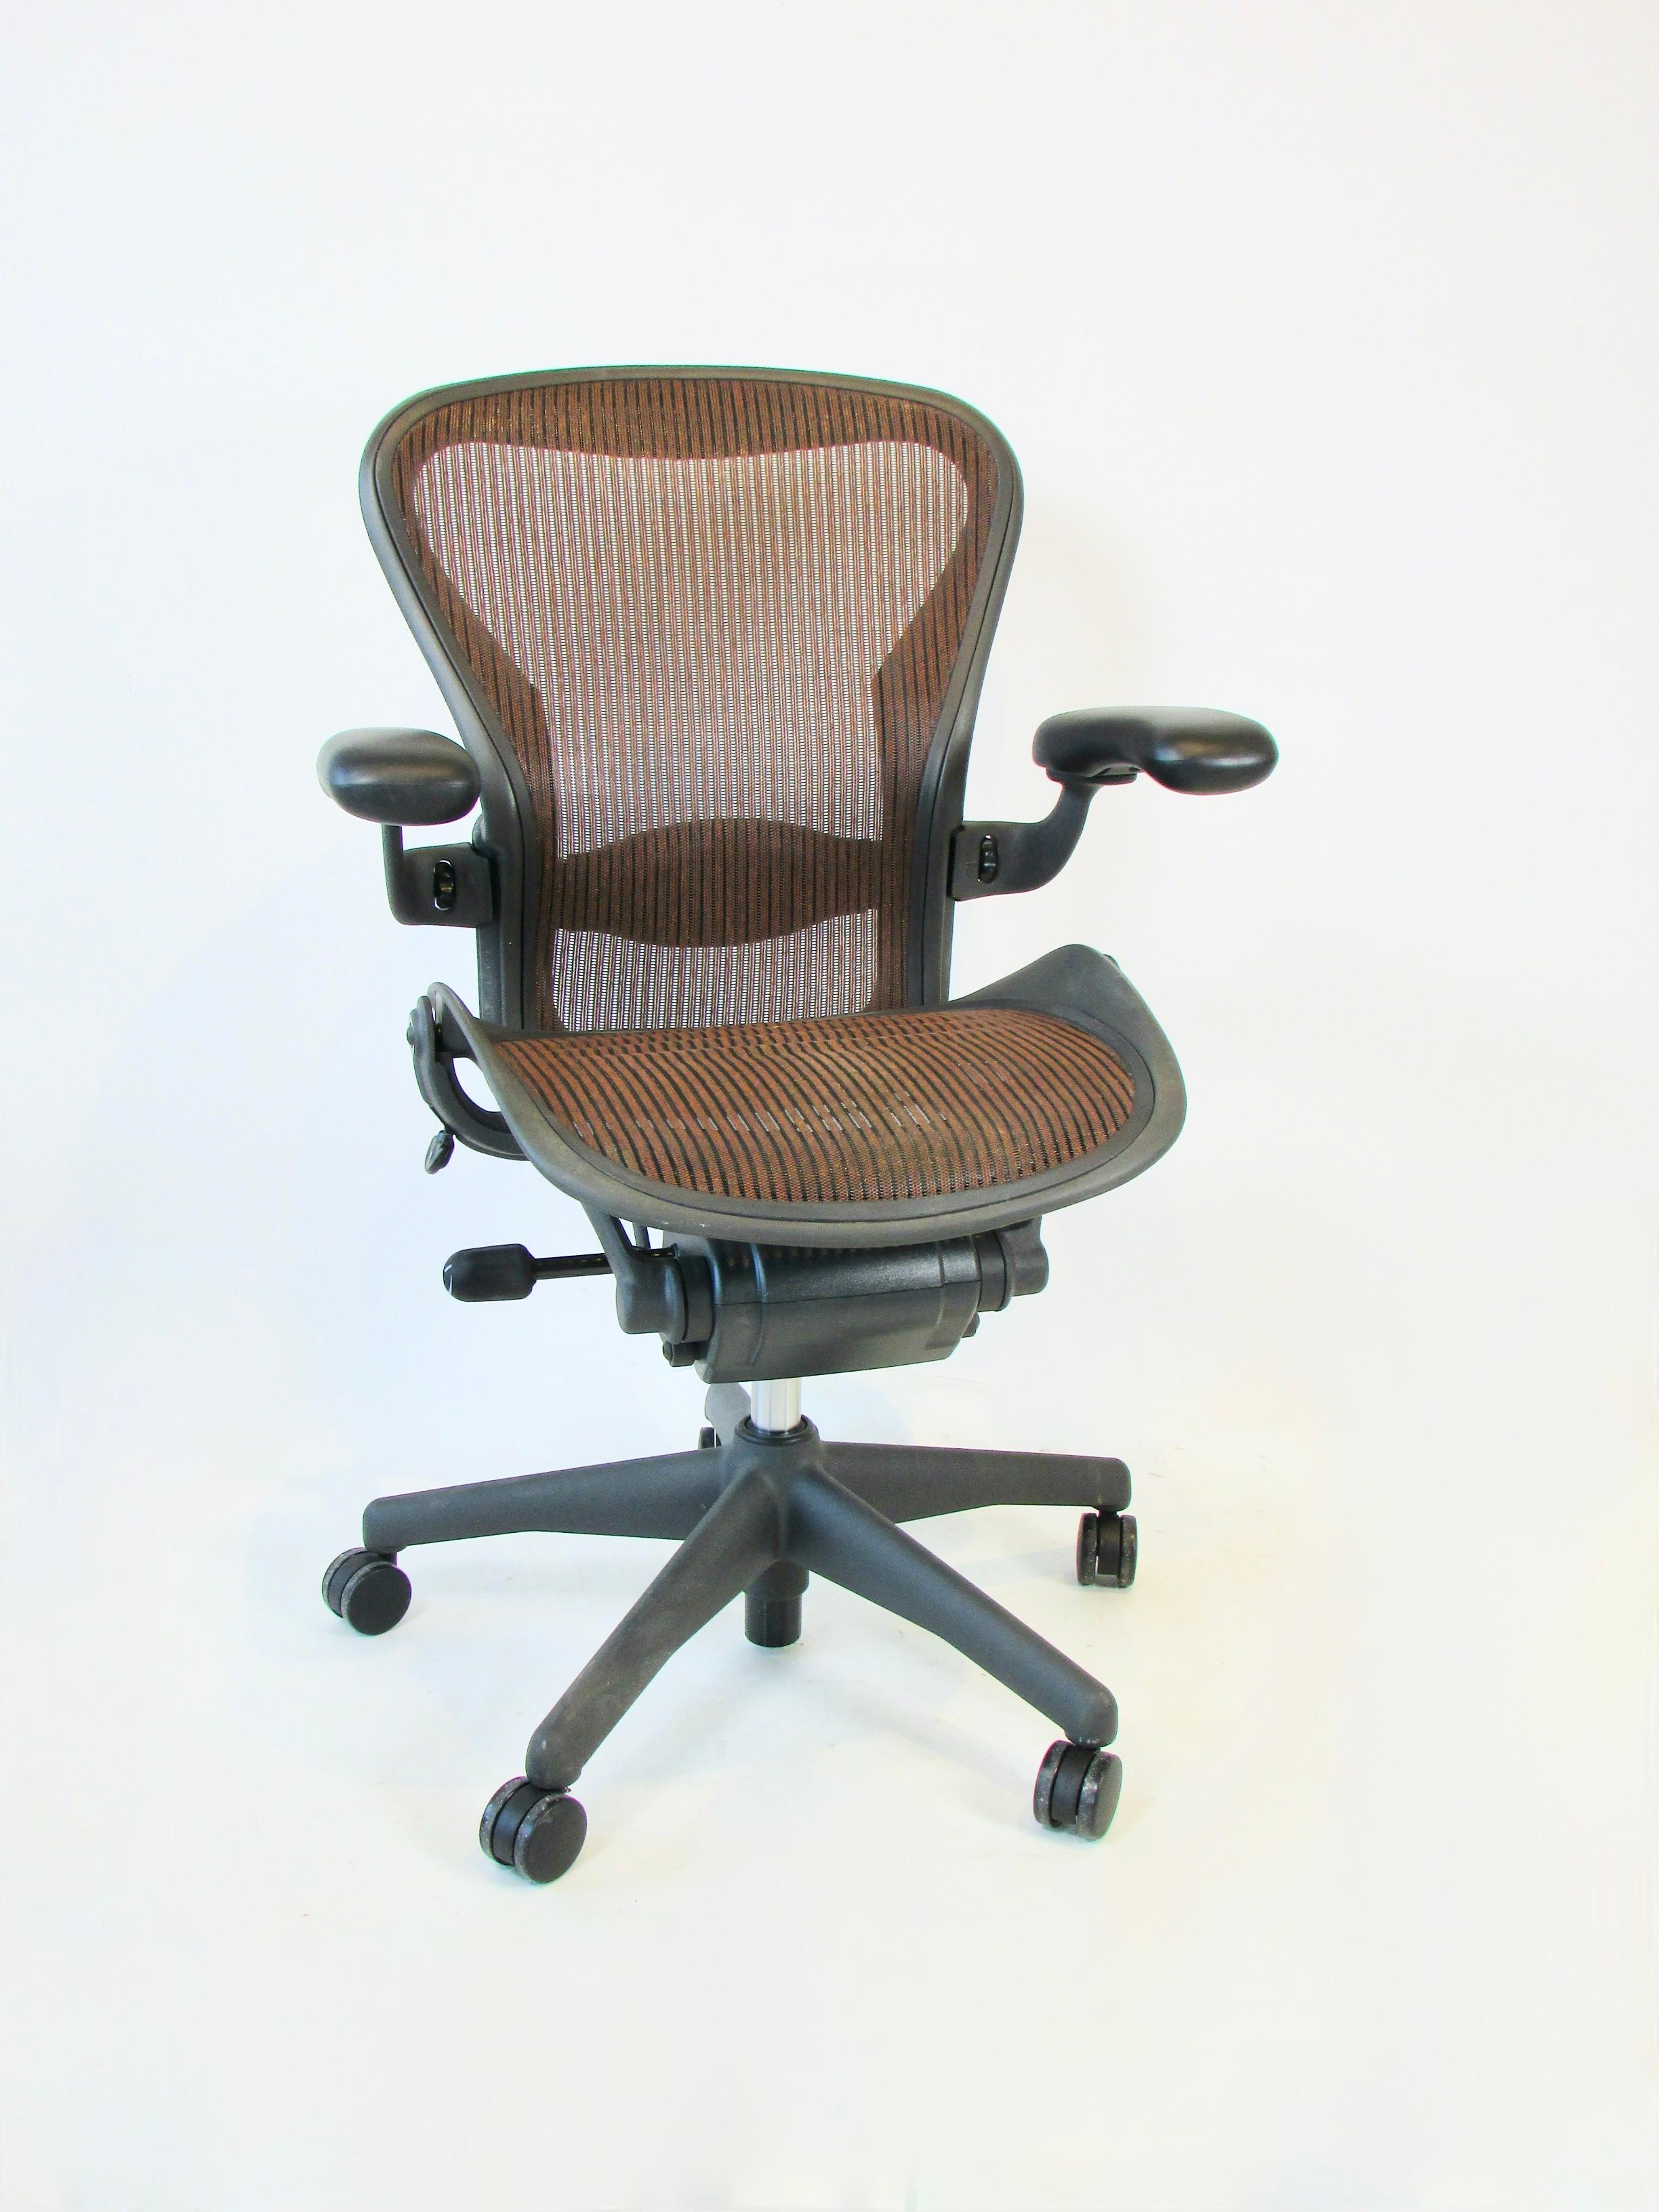 Designed by Bill Stumpf and Don Chadwick for Herman Miller . Aeron chair revolutionized office seating with its fresh design. Pellicle suspension material and a patented Posture Fit back support presenting the ideal sit position. Shoulders back,